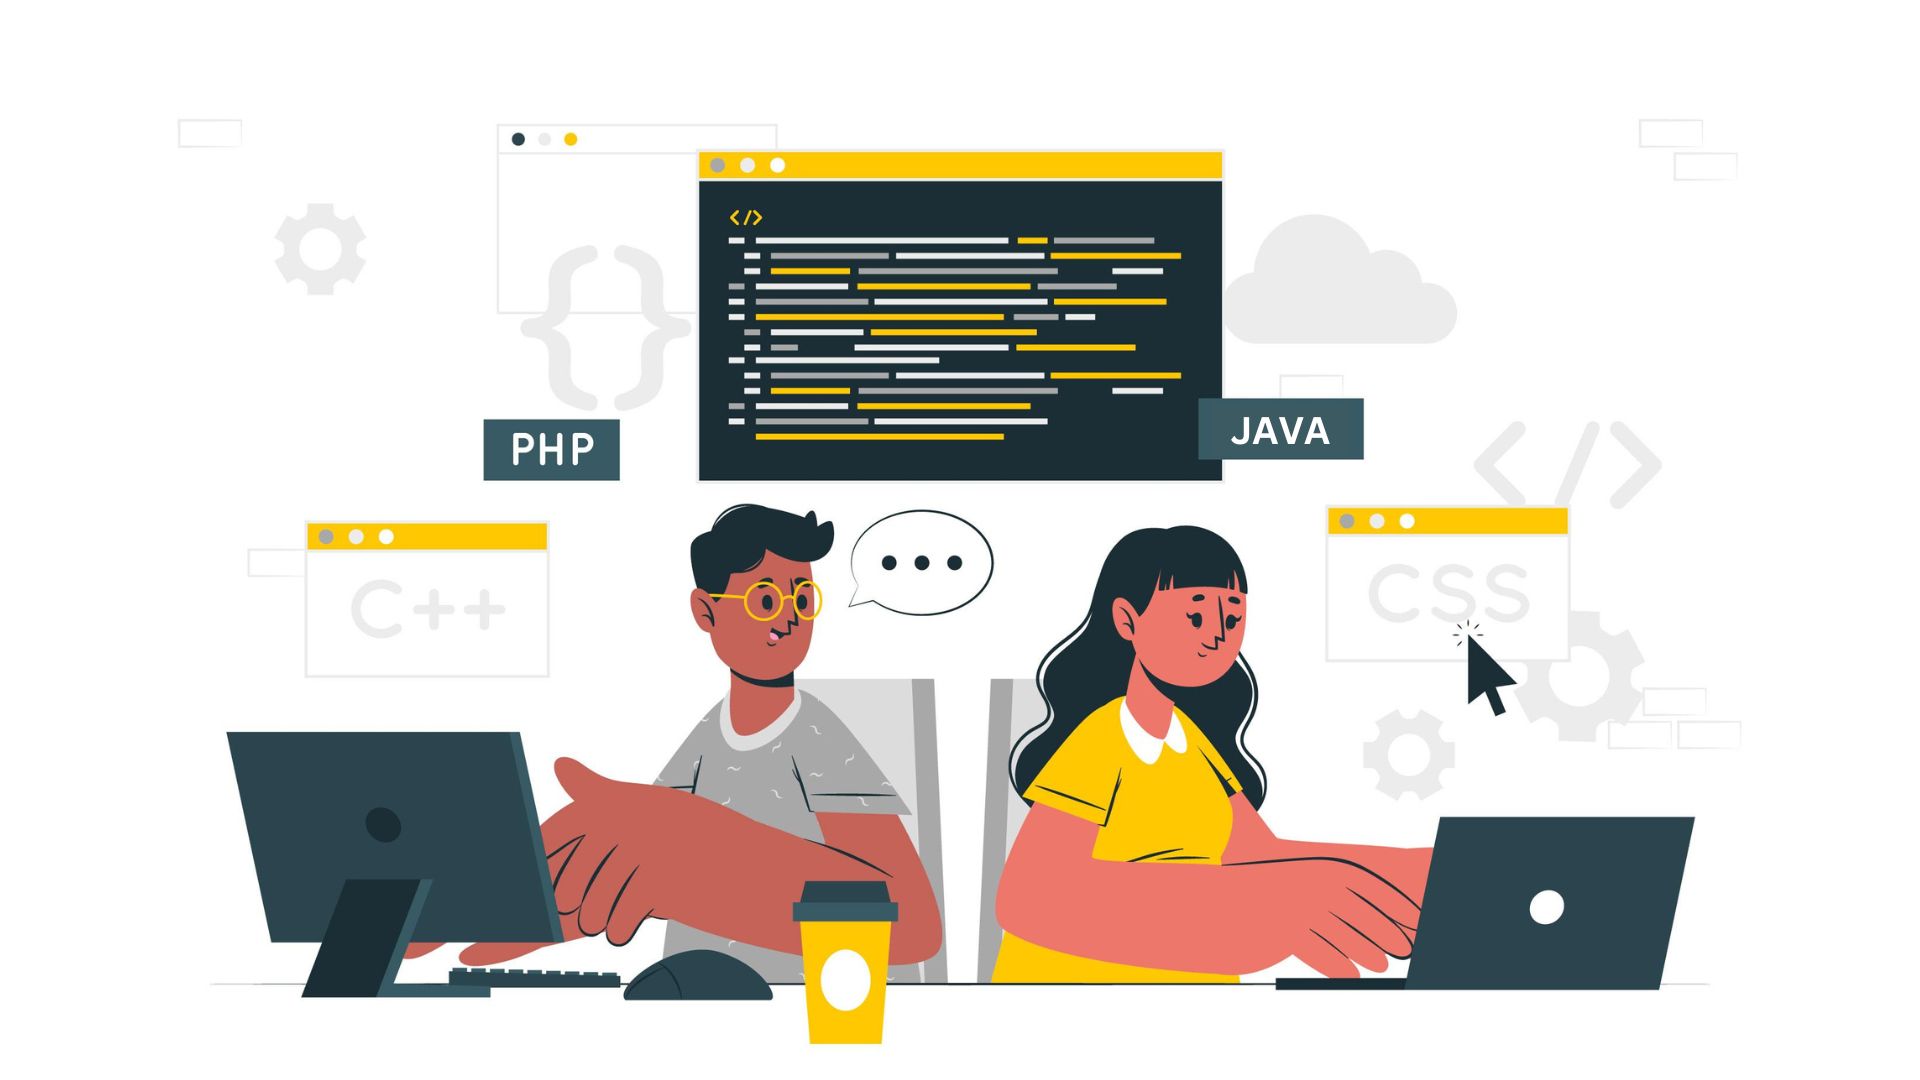 Java or PHP: Which is Best Suitable for Developing Microservices